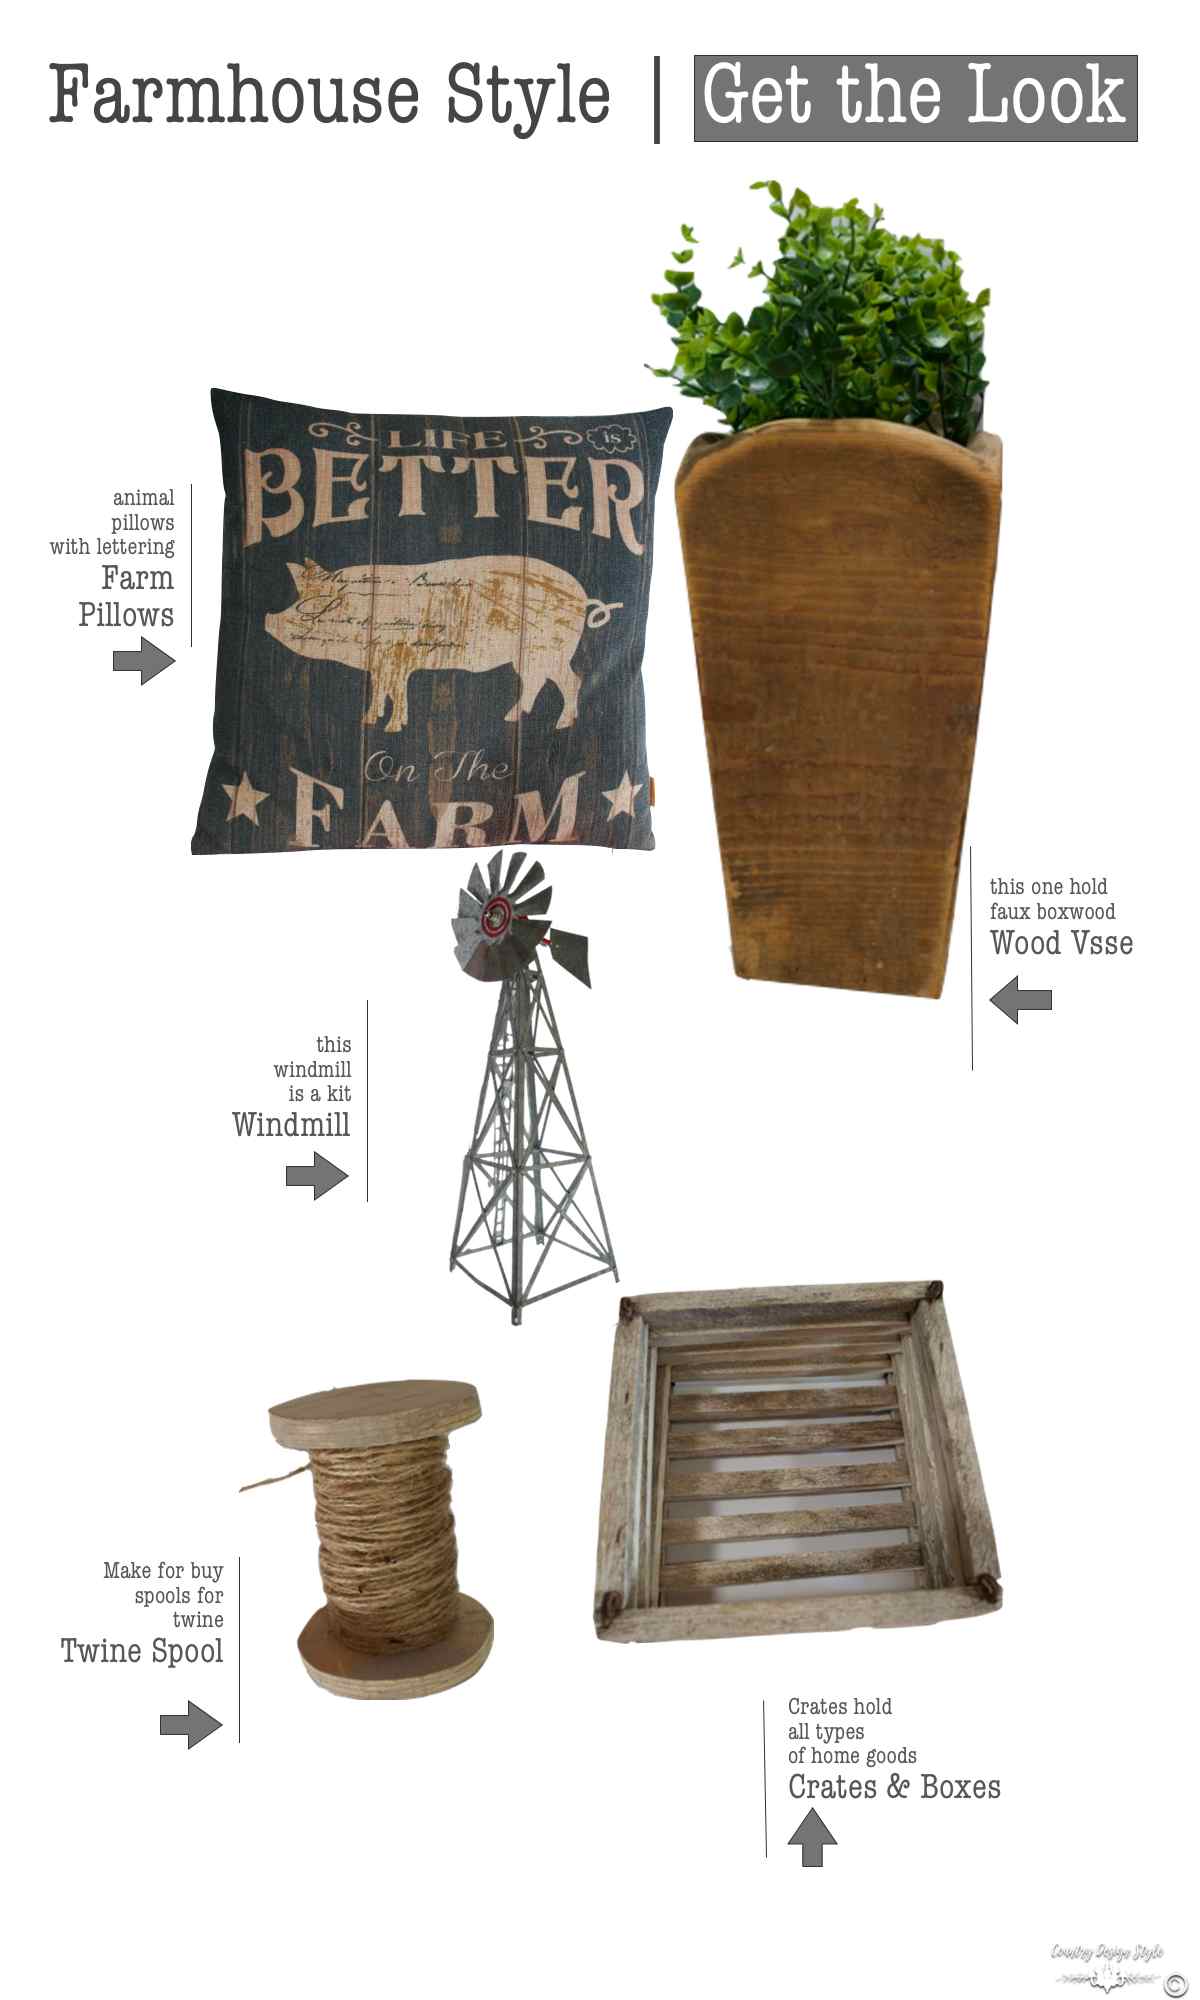 Farmhouse Style Get the Look | Country Design Style | countrydesignstyle.com